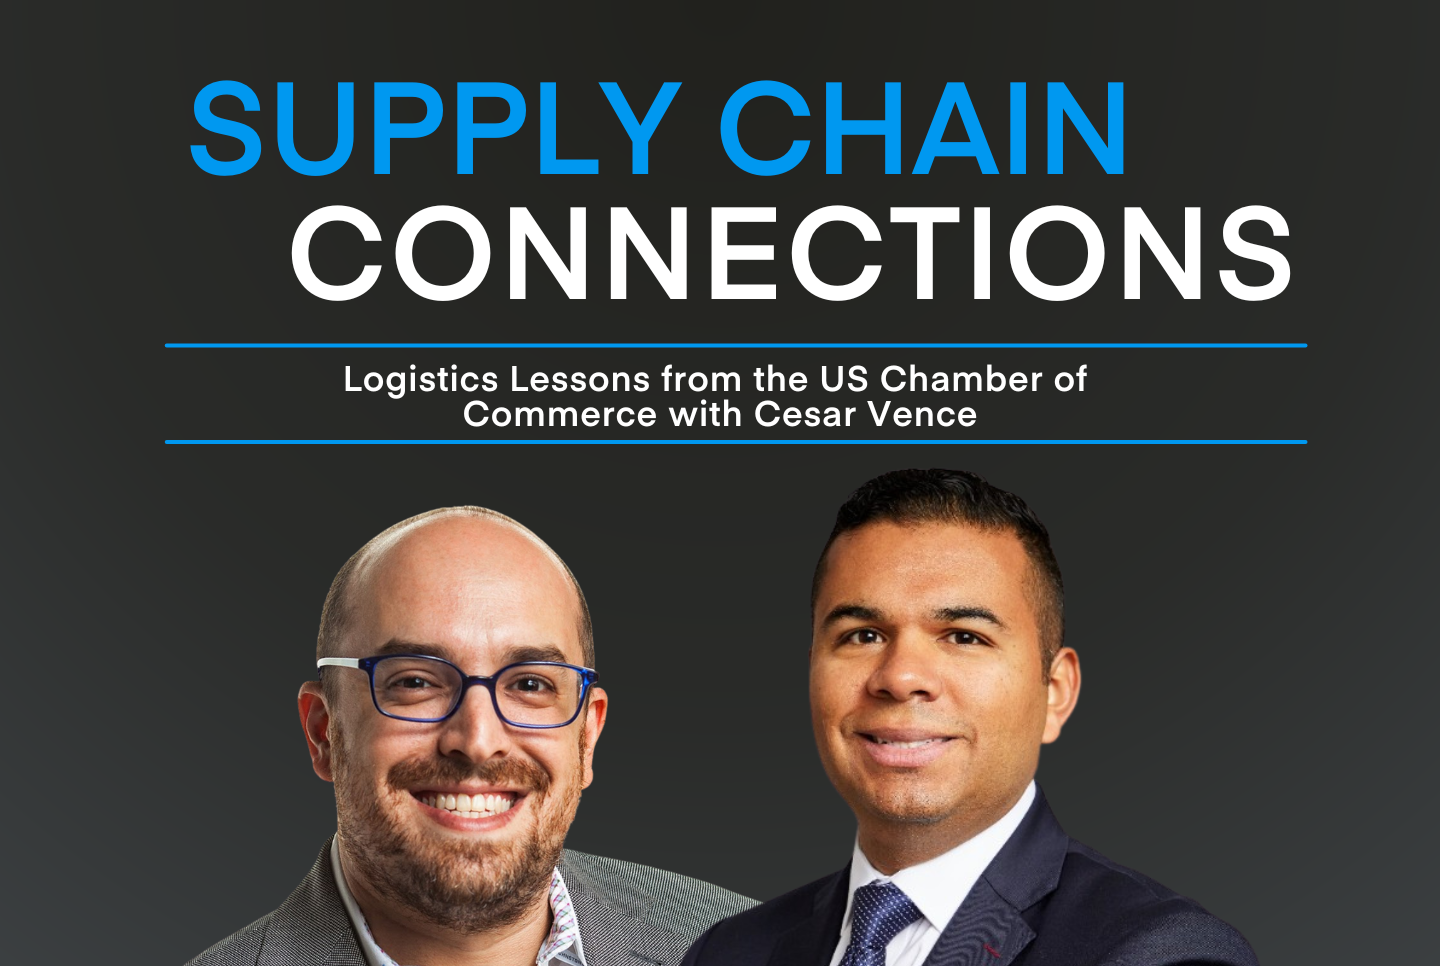 Logistics Lessons from the US Chamber of Commerce with Cesar Vence